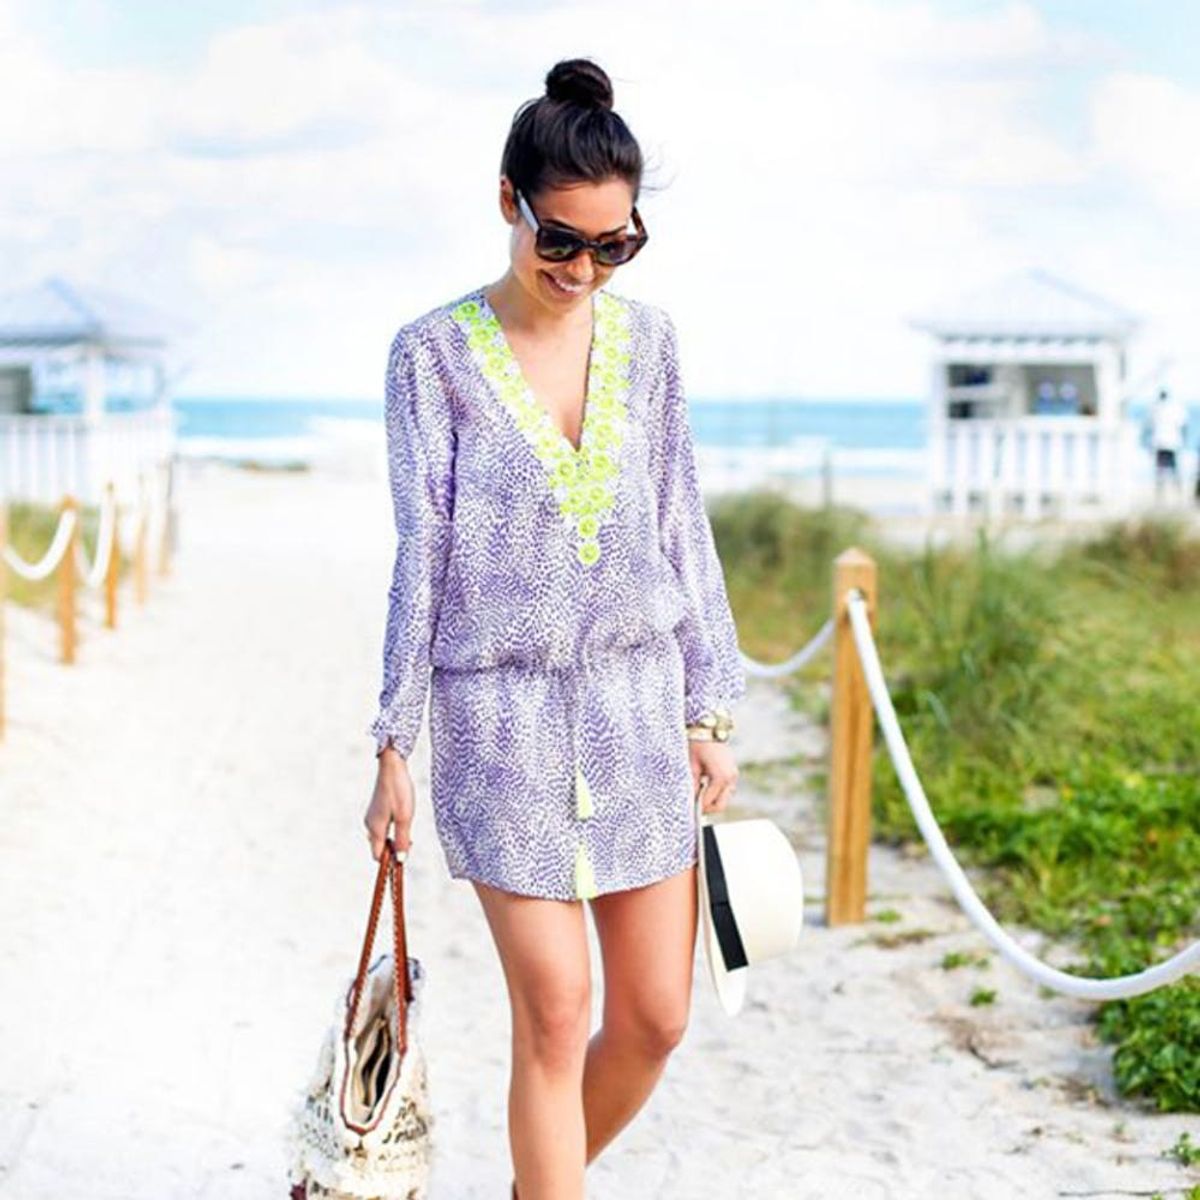 Vacation in Style With These Chic Blogger Looks